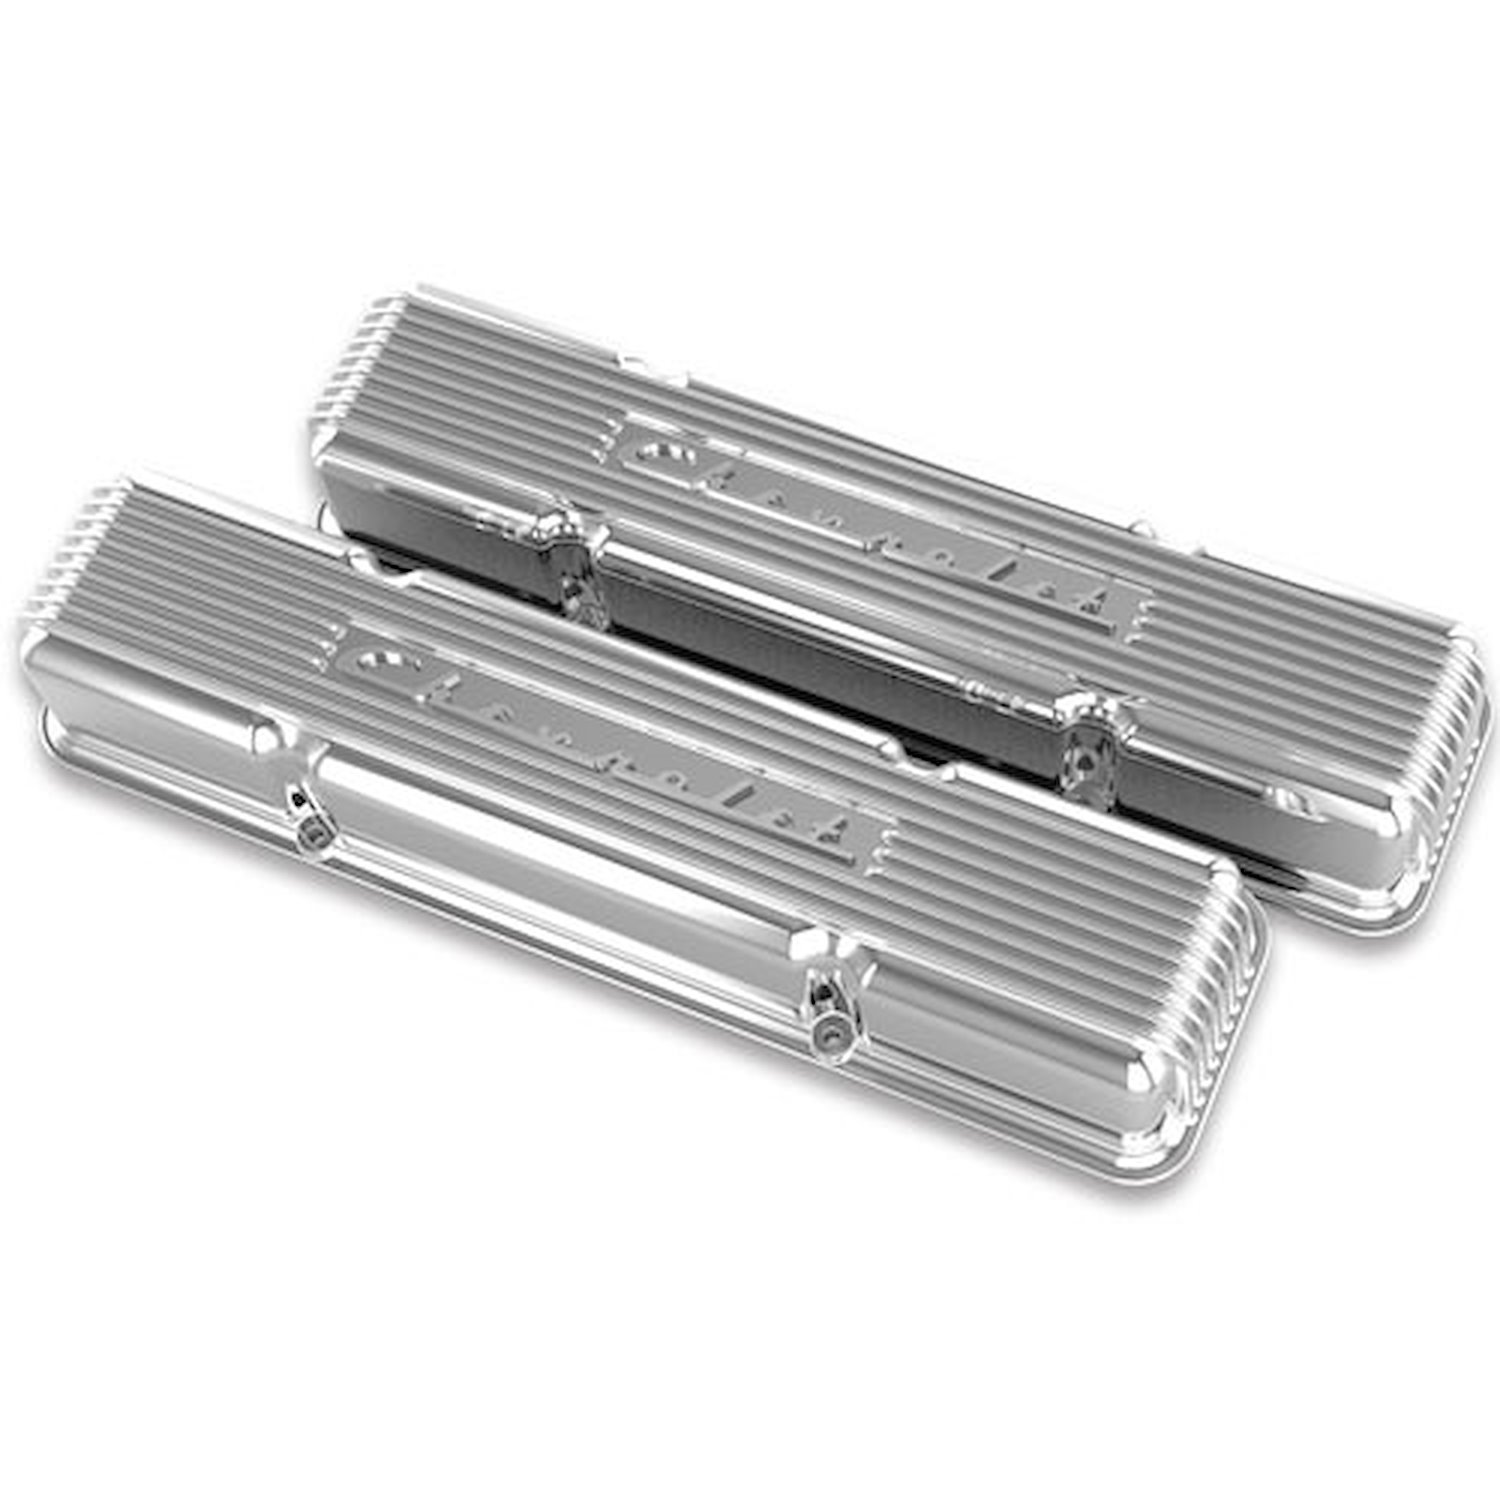 Officially Licensed Chevrolet Vintage Series Finned Valve Covers